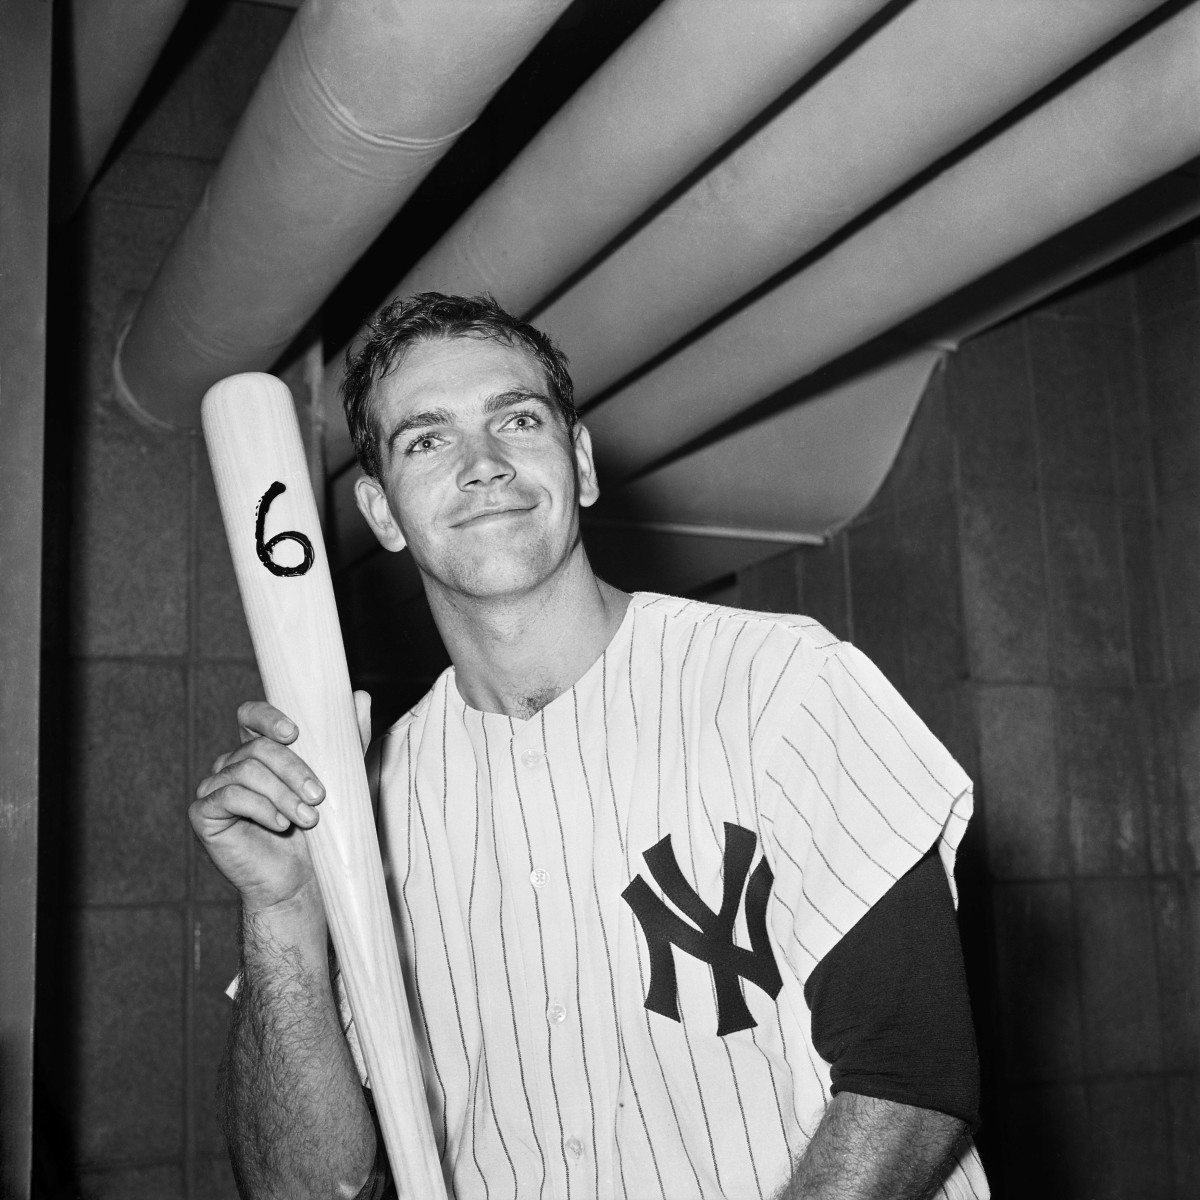 After Game 3, Bobby Richardson displays bat marked to represent his six-RBI game. Photo: Bettmann/Getty Images